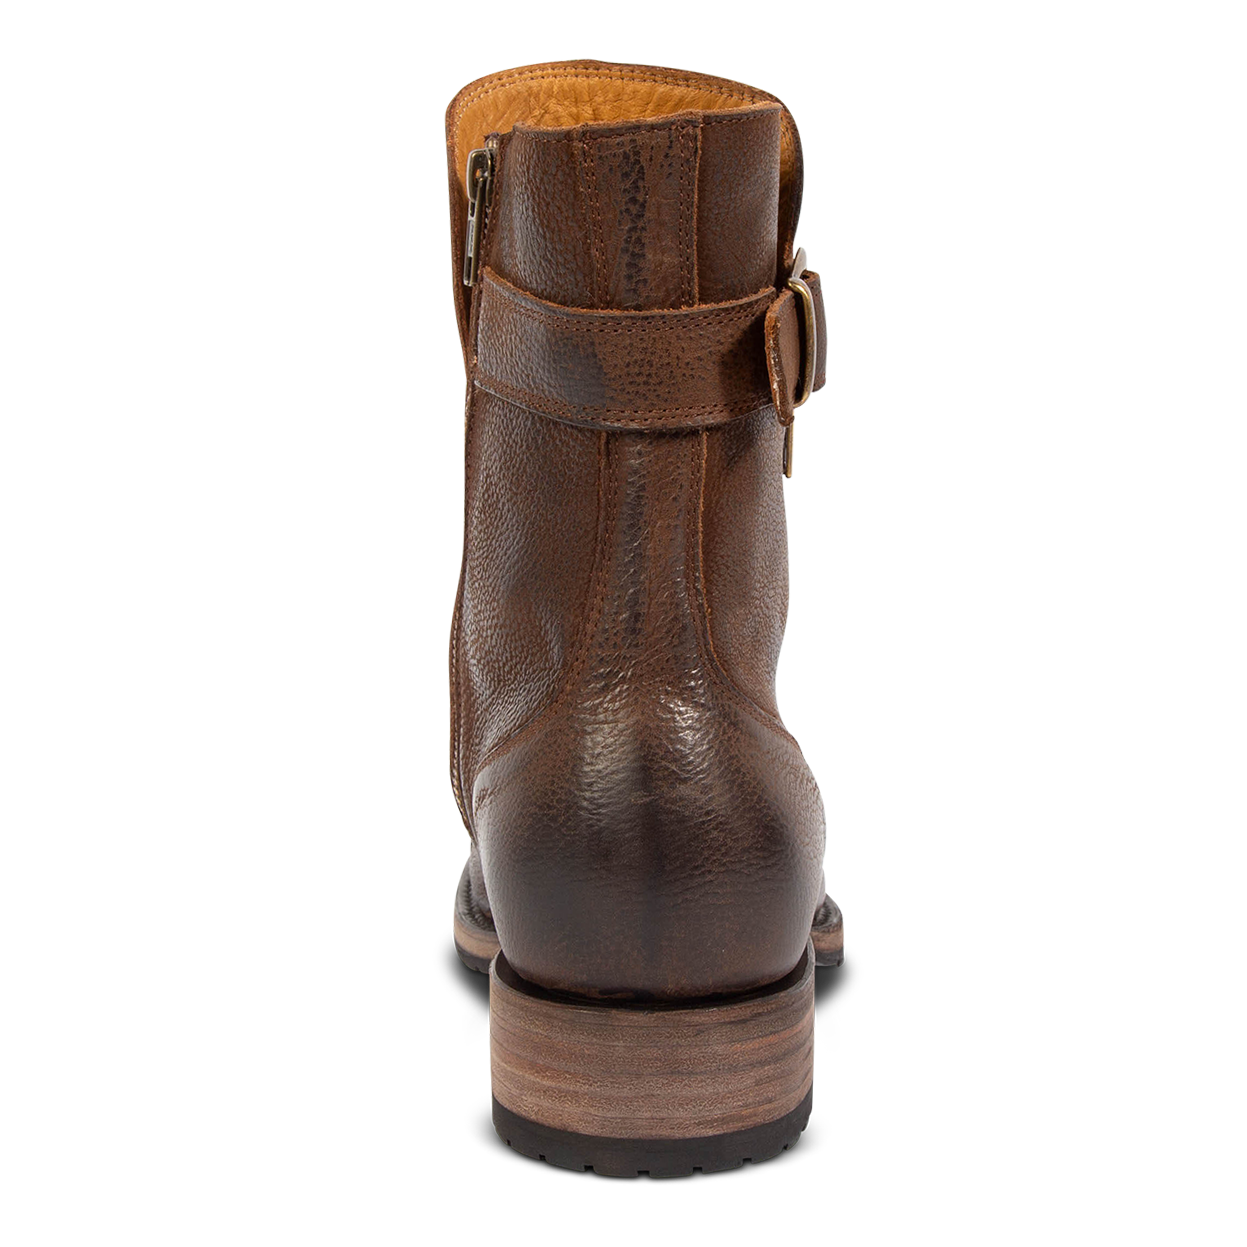 Back view showing buckle strap on FREEBIRD men's Chayse brown boot